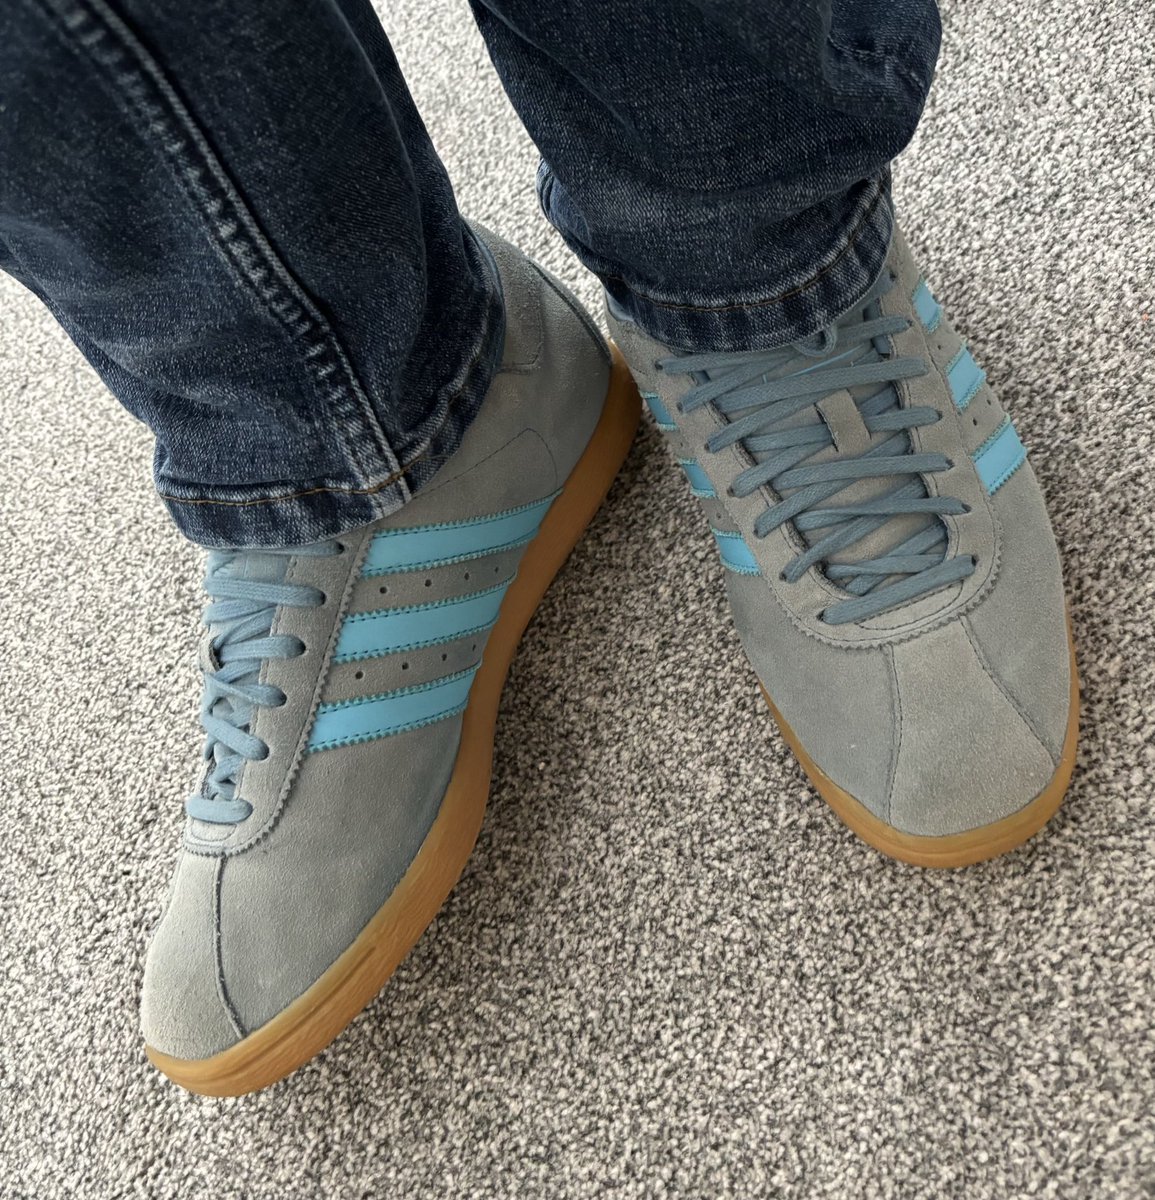 Today’s choice for the match… Tobaccos on foot /// #ShareYourStripes just one more point… #dcfc 
Up them Shaggin’ Rams 🐏